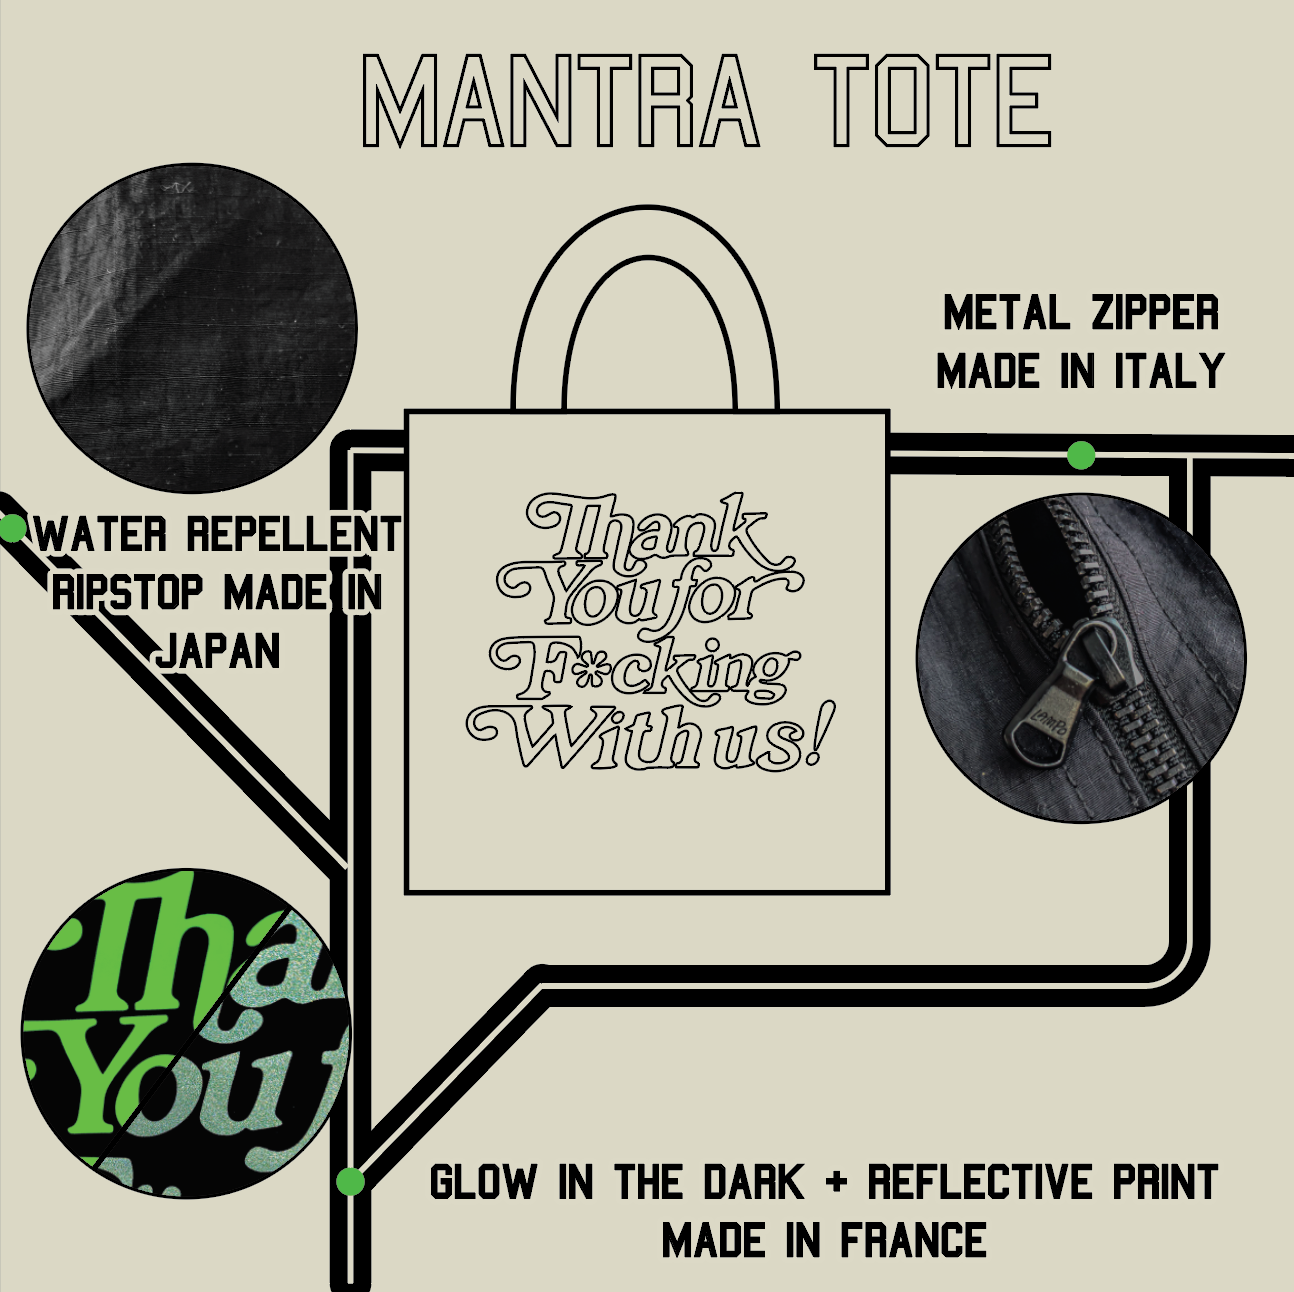 MANTRA© TOTE